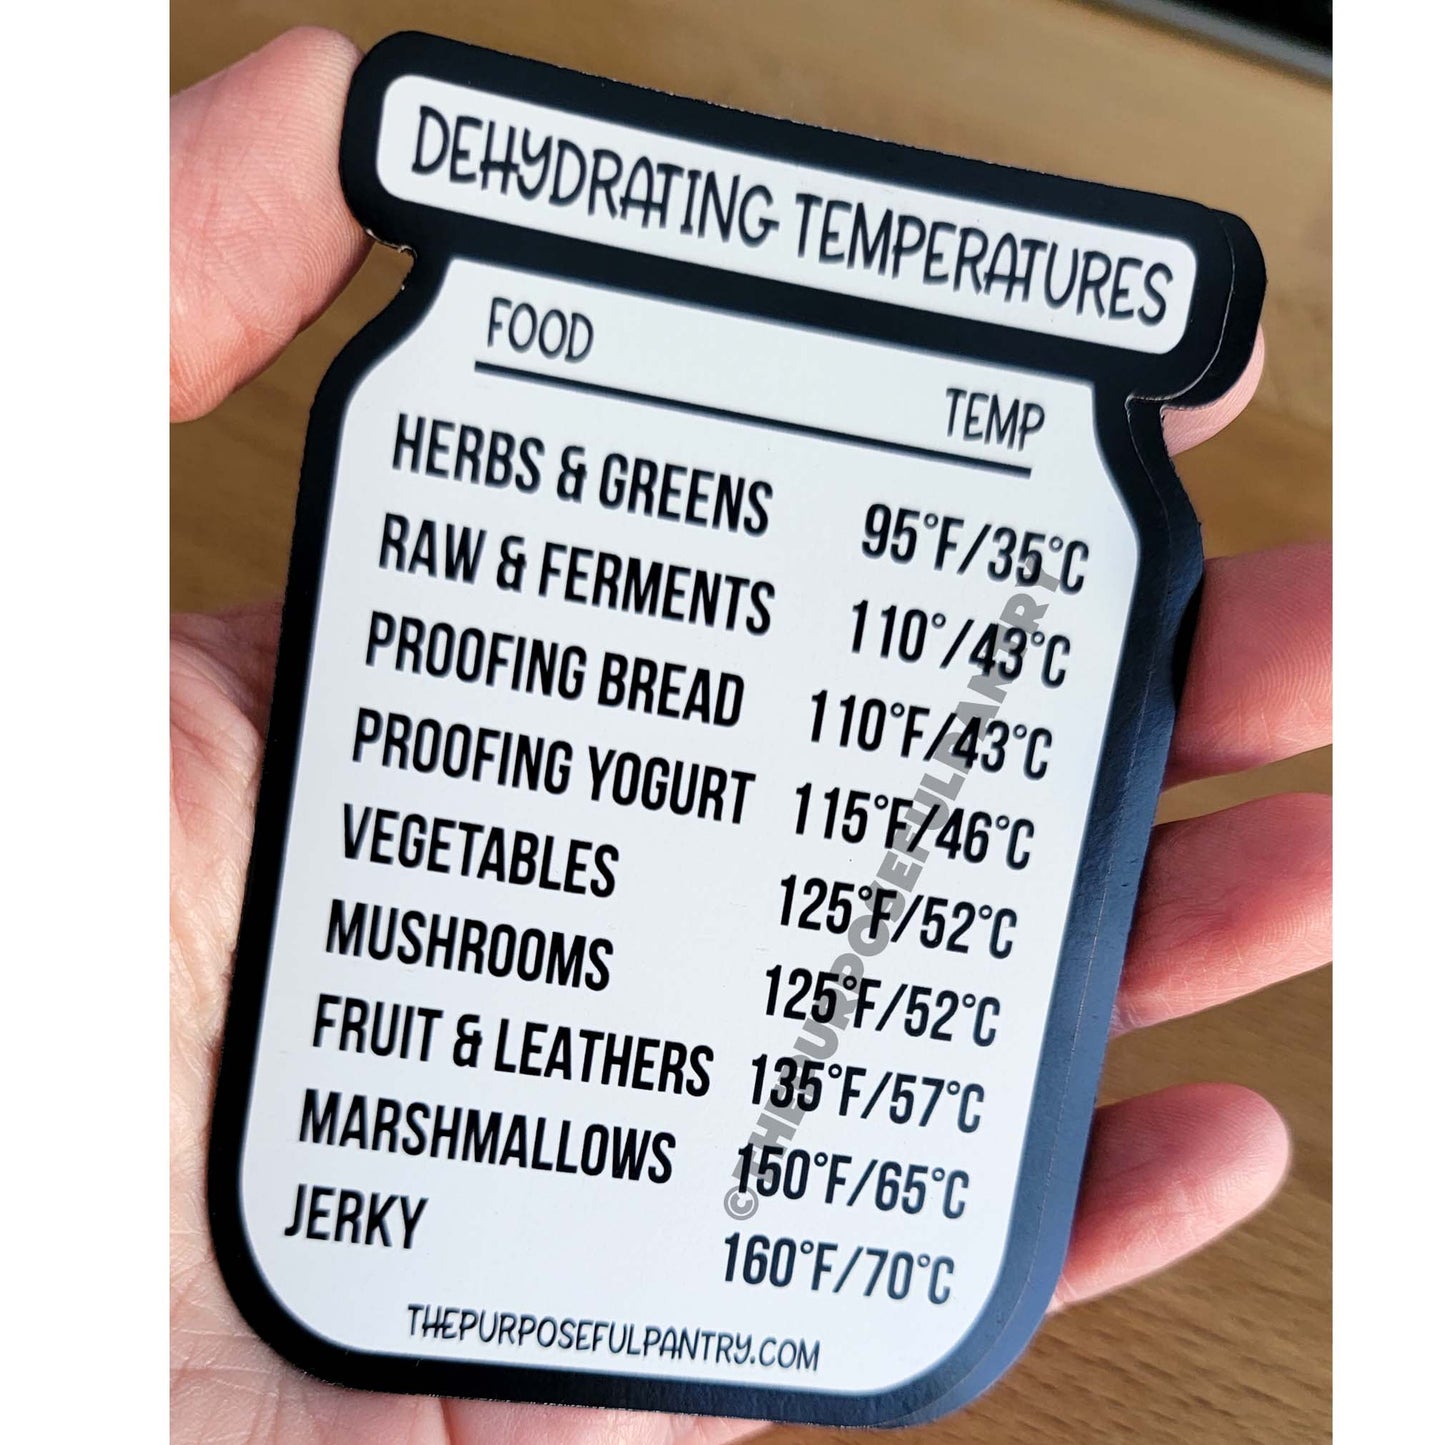 A person is holding a label that says The Purposeful Pantry Dehydrator Temperature Guide Refrigerator Magnet.